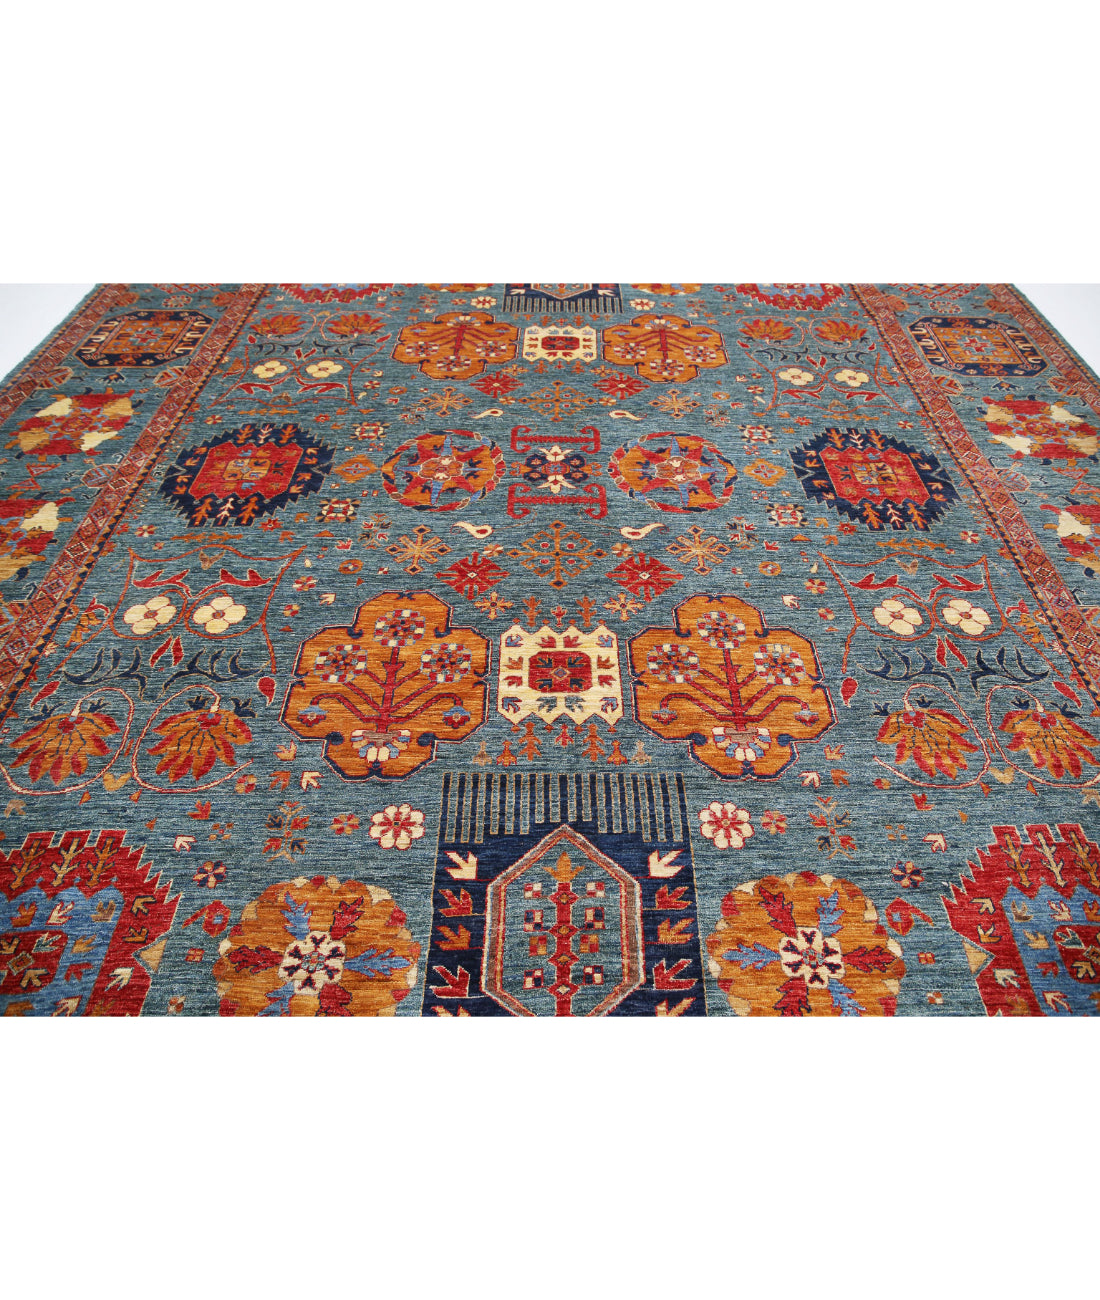 Hand Knotted Nomadic Caucasian Humna Wool Rug - 12'11'' x 16'2'' 12'11'' x 16'2'' (388 X 485) / Green / Green